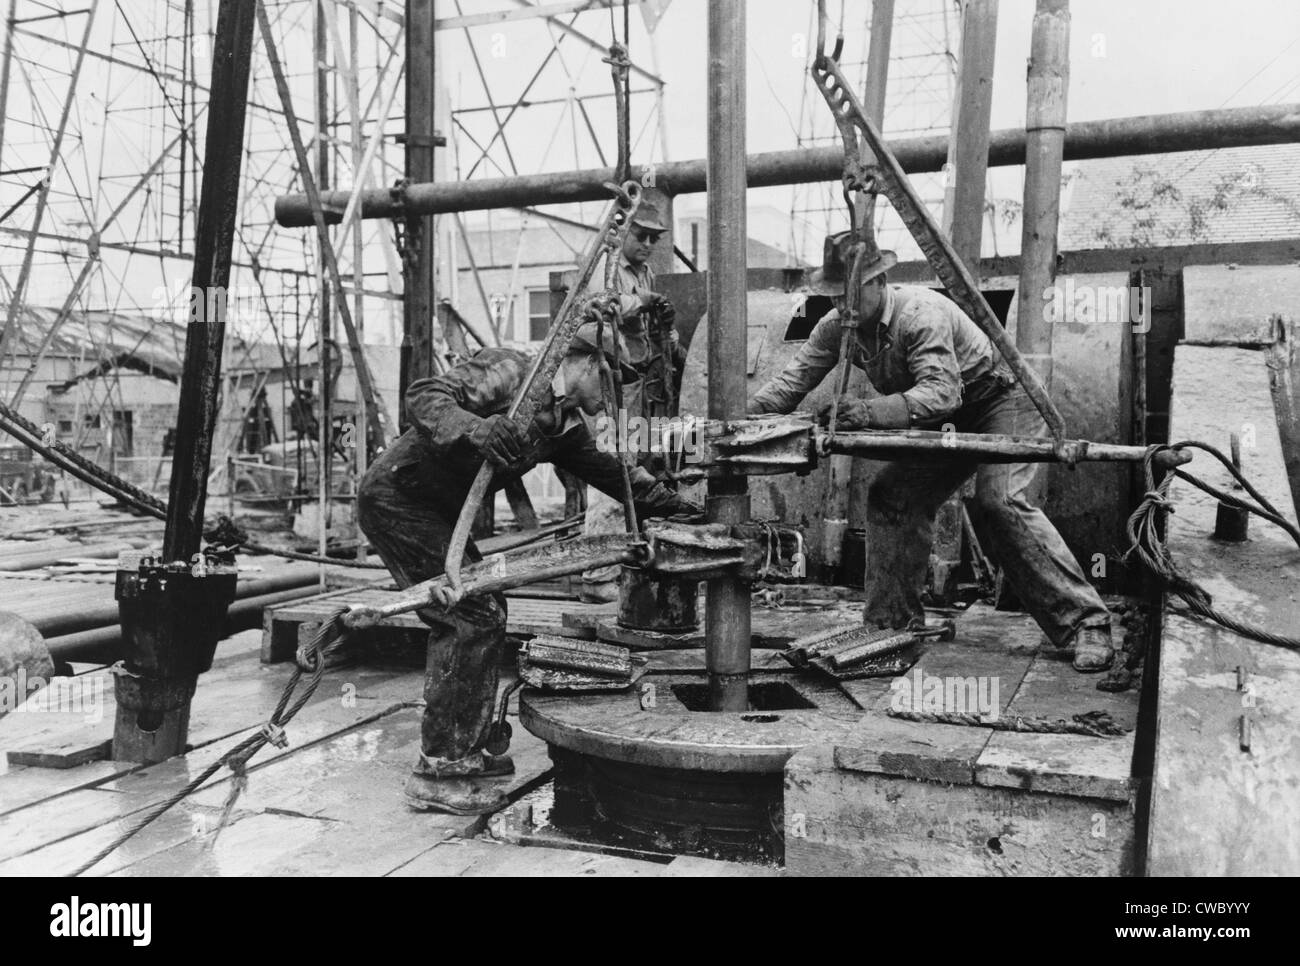 Oil rig workers, called roughnecks, at work, loosening sections of pipe on an drilling platform, Kilgore, Texas. 1939 Photo by Stock Photo